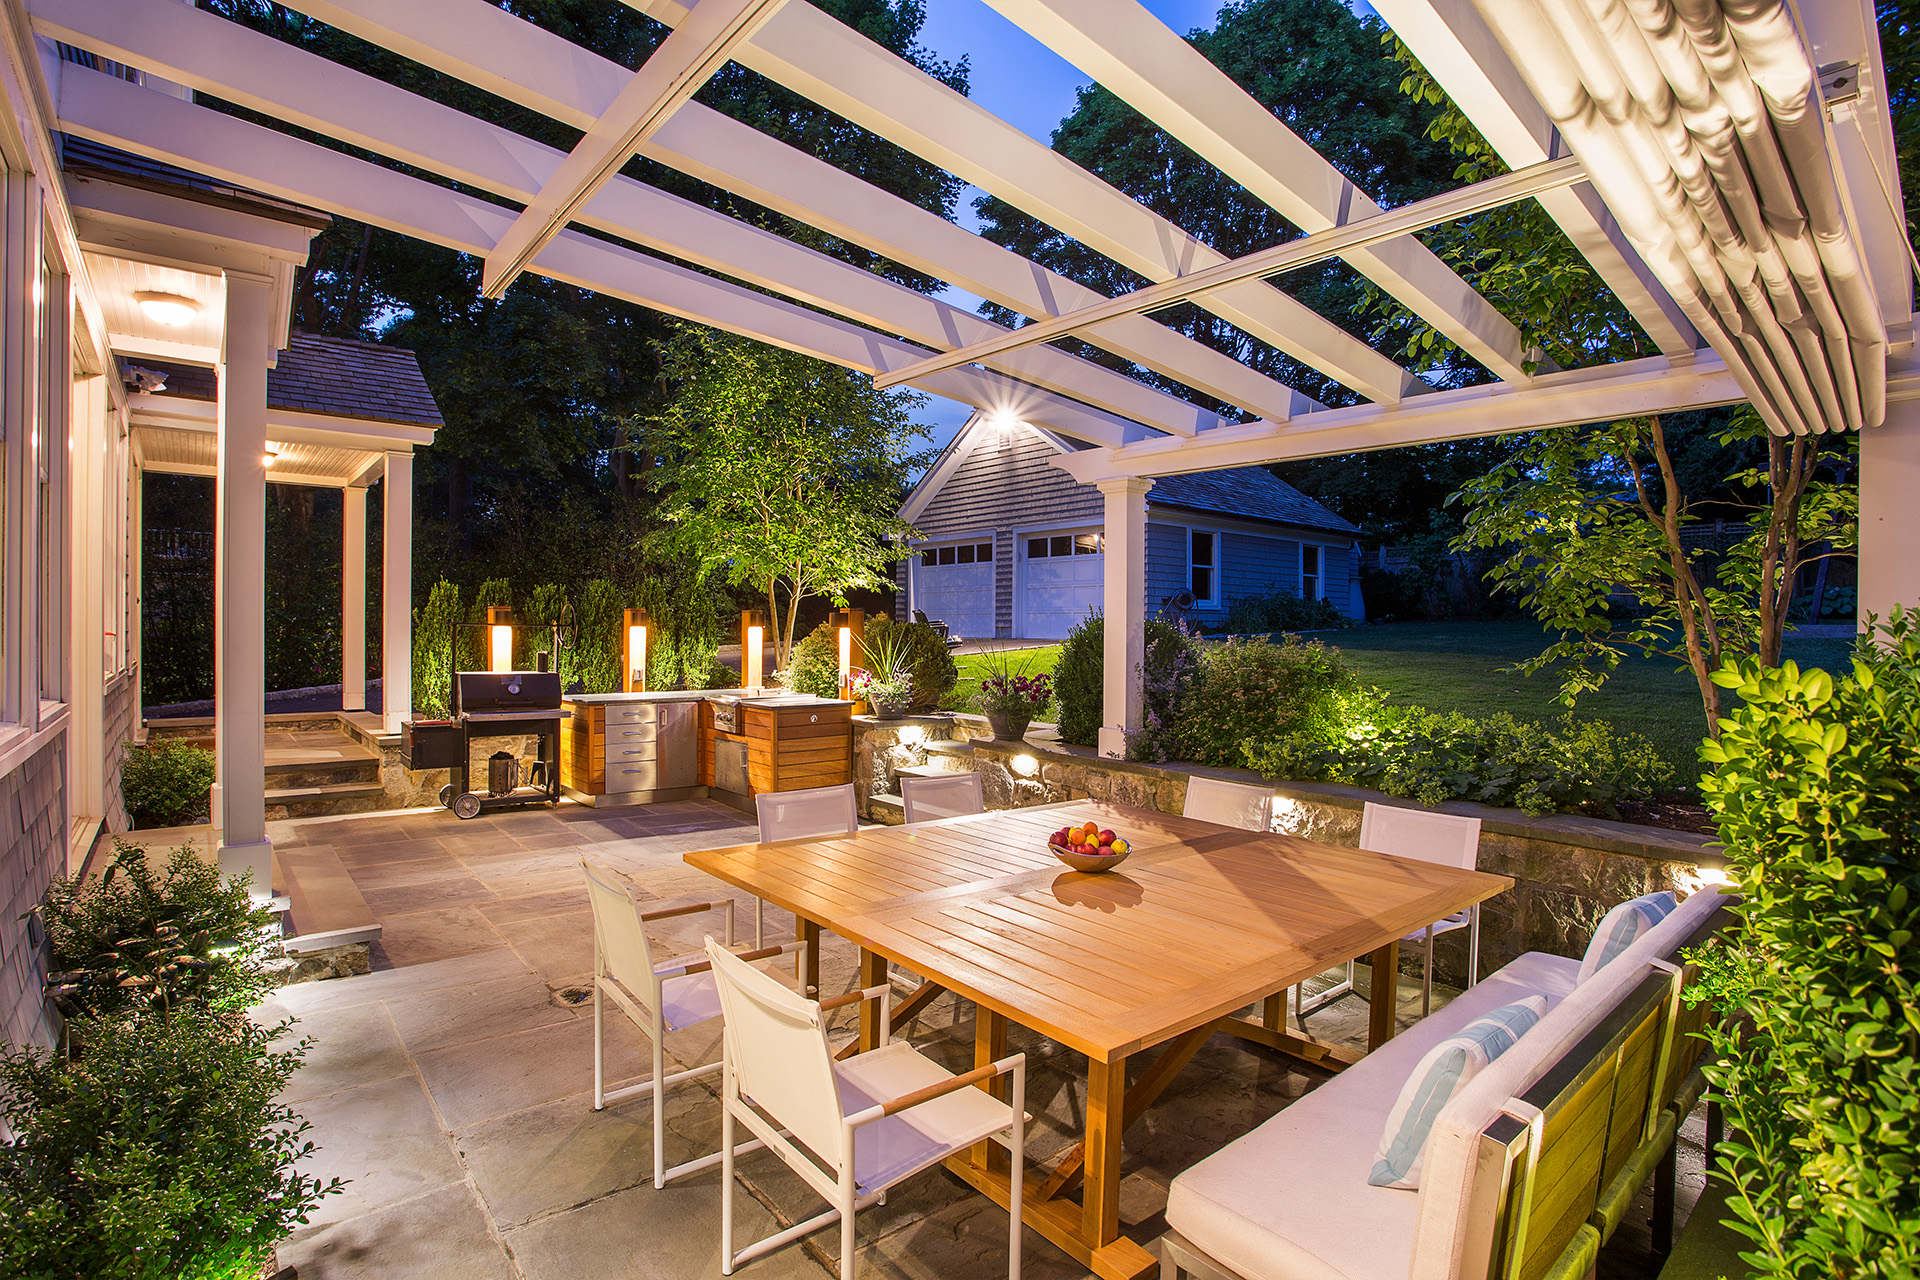 Backyard Remodel Tips to Use